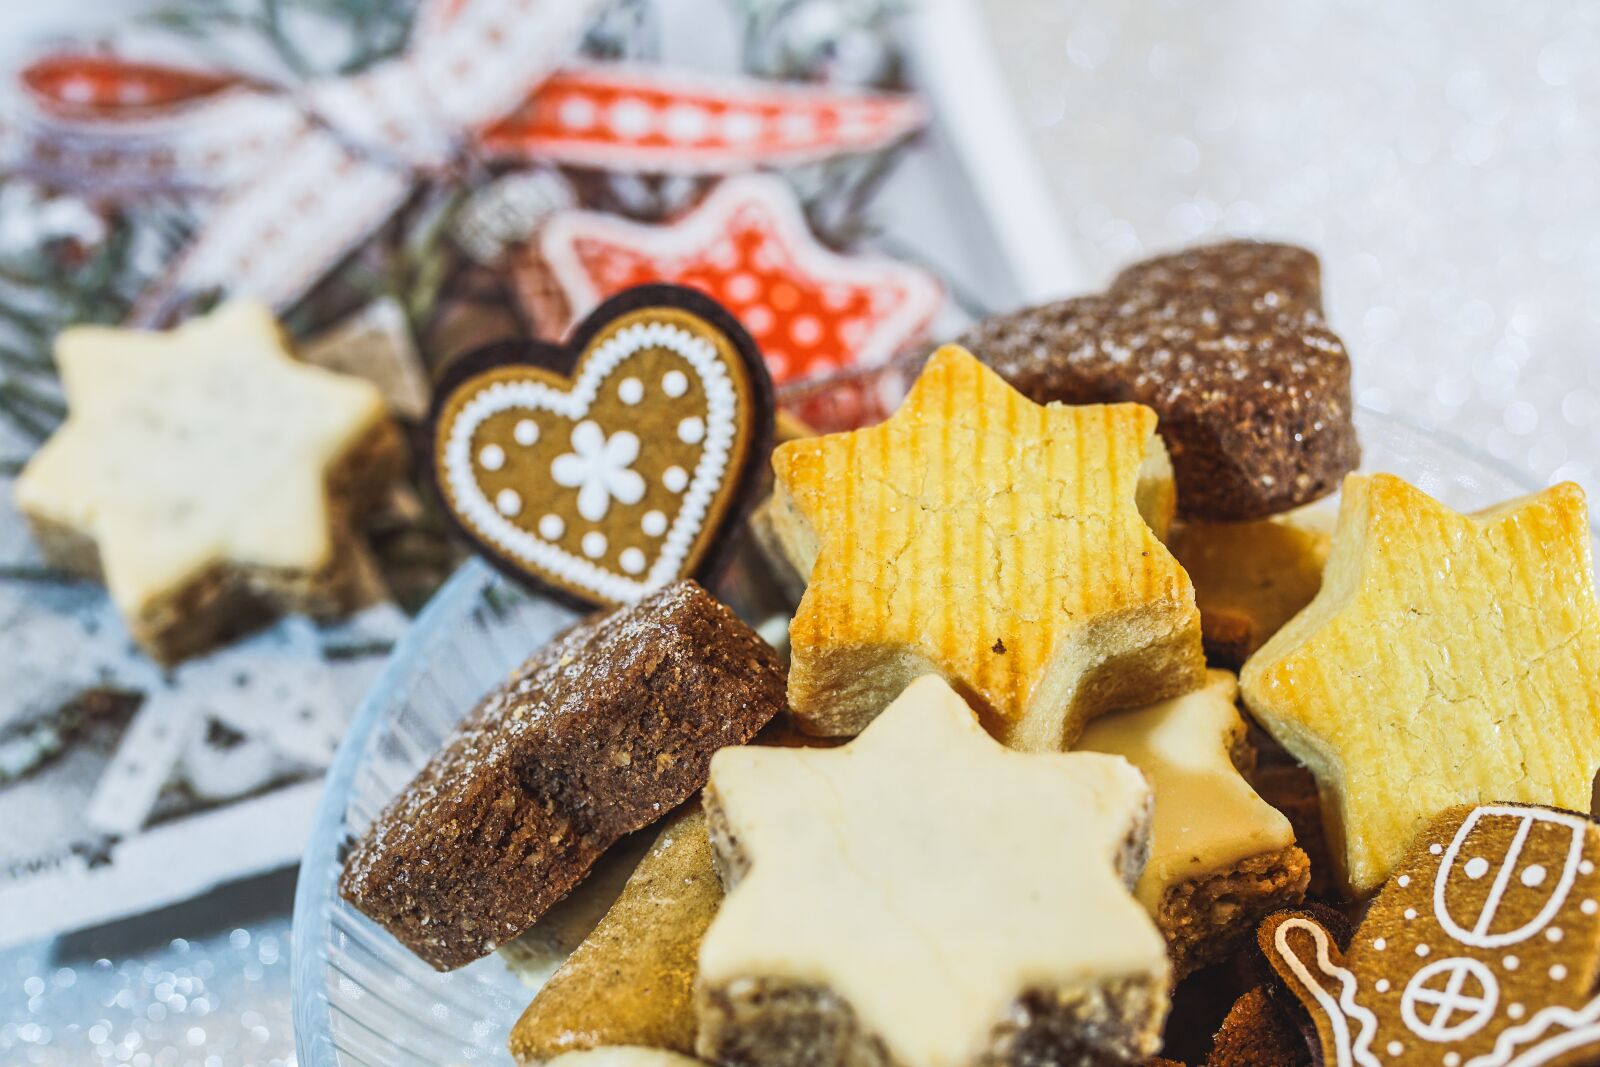 35mm F1.4 sample photo. Pastries, christmas cookies, cookies photography